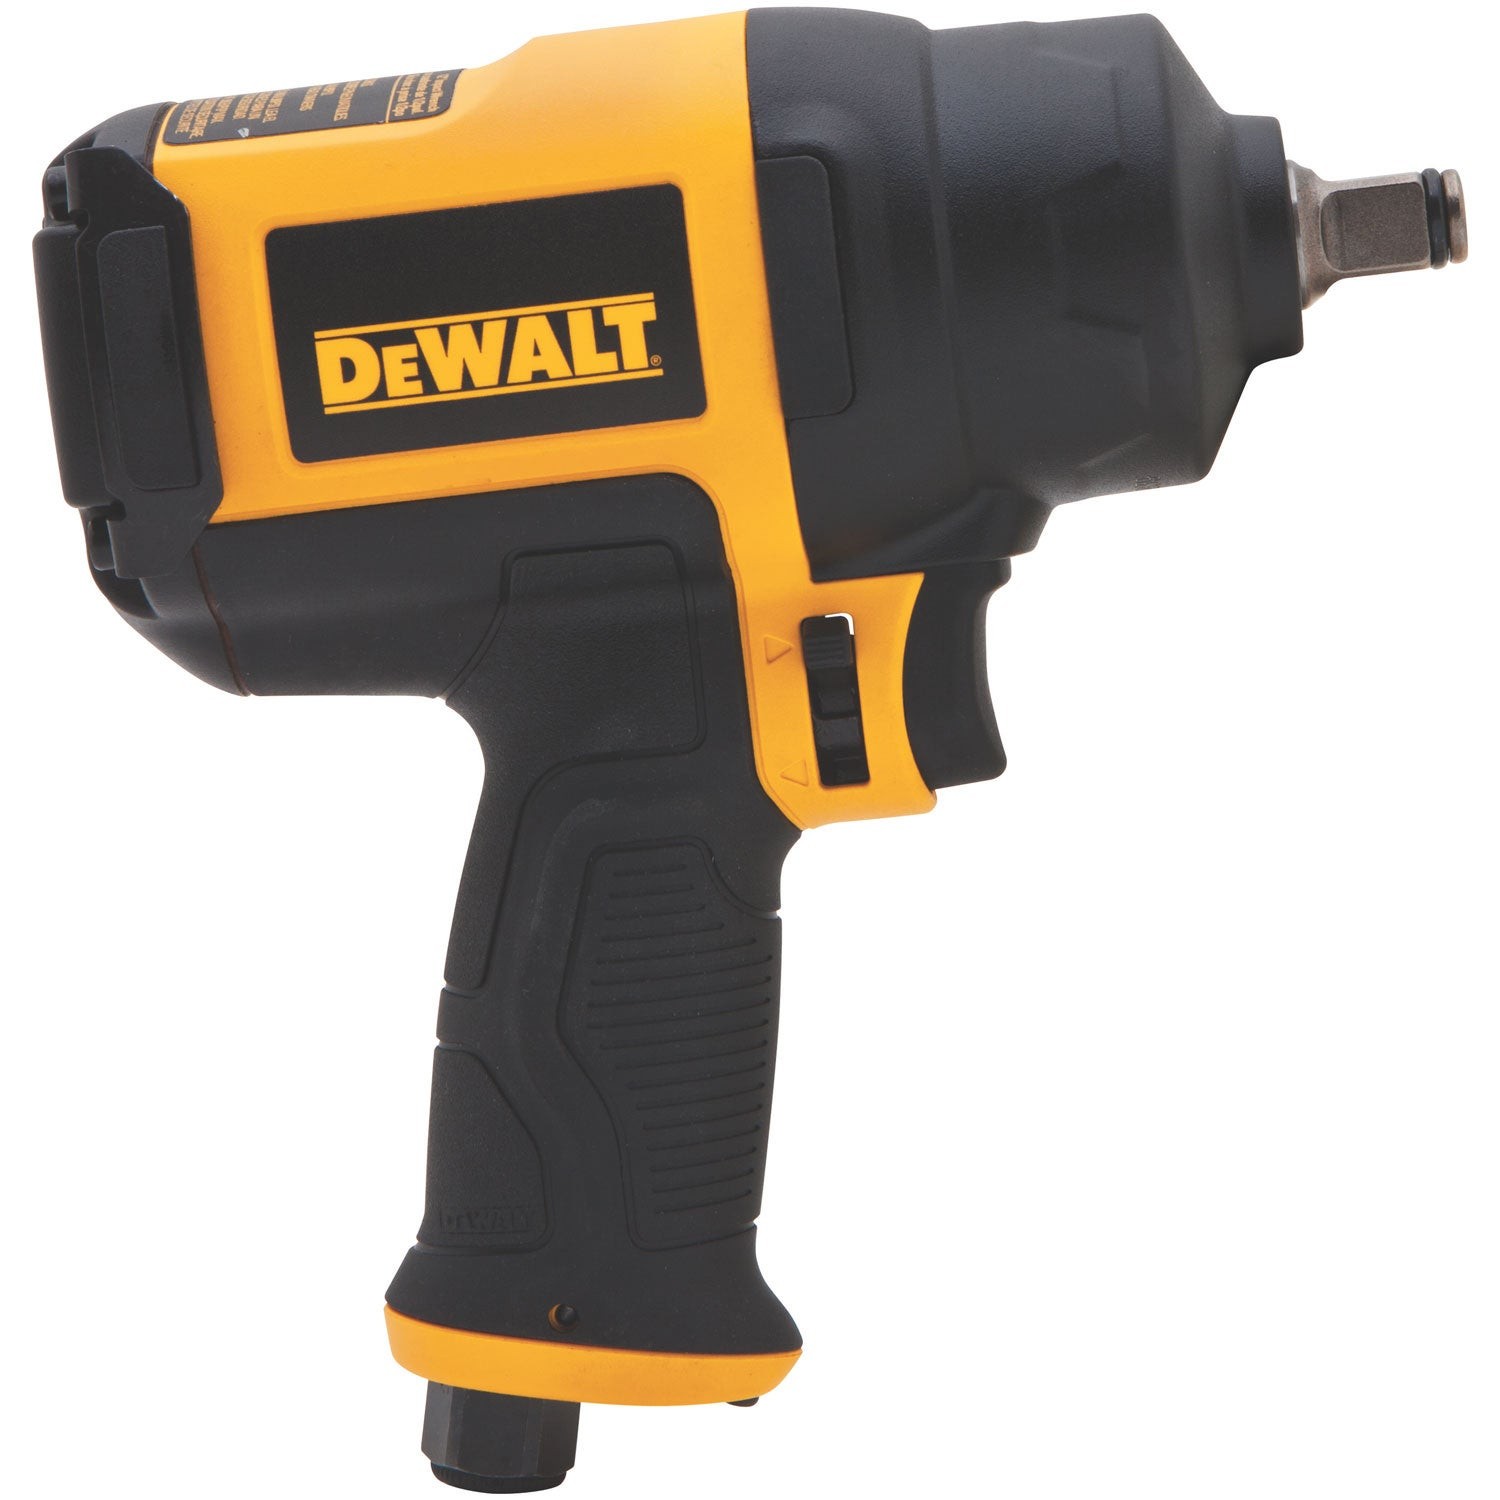 1/2" Drive Impact Wrench